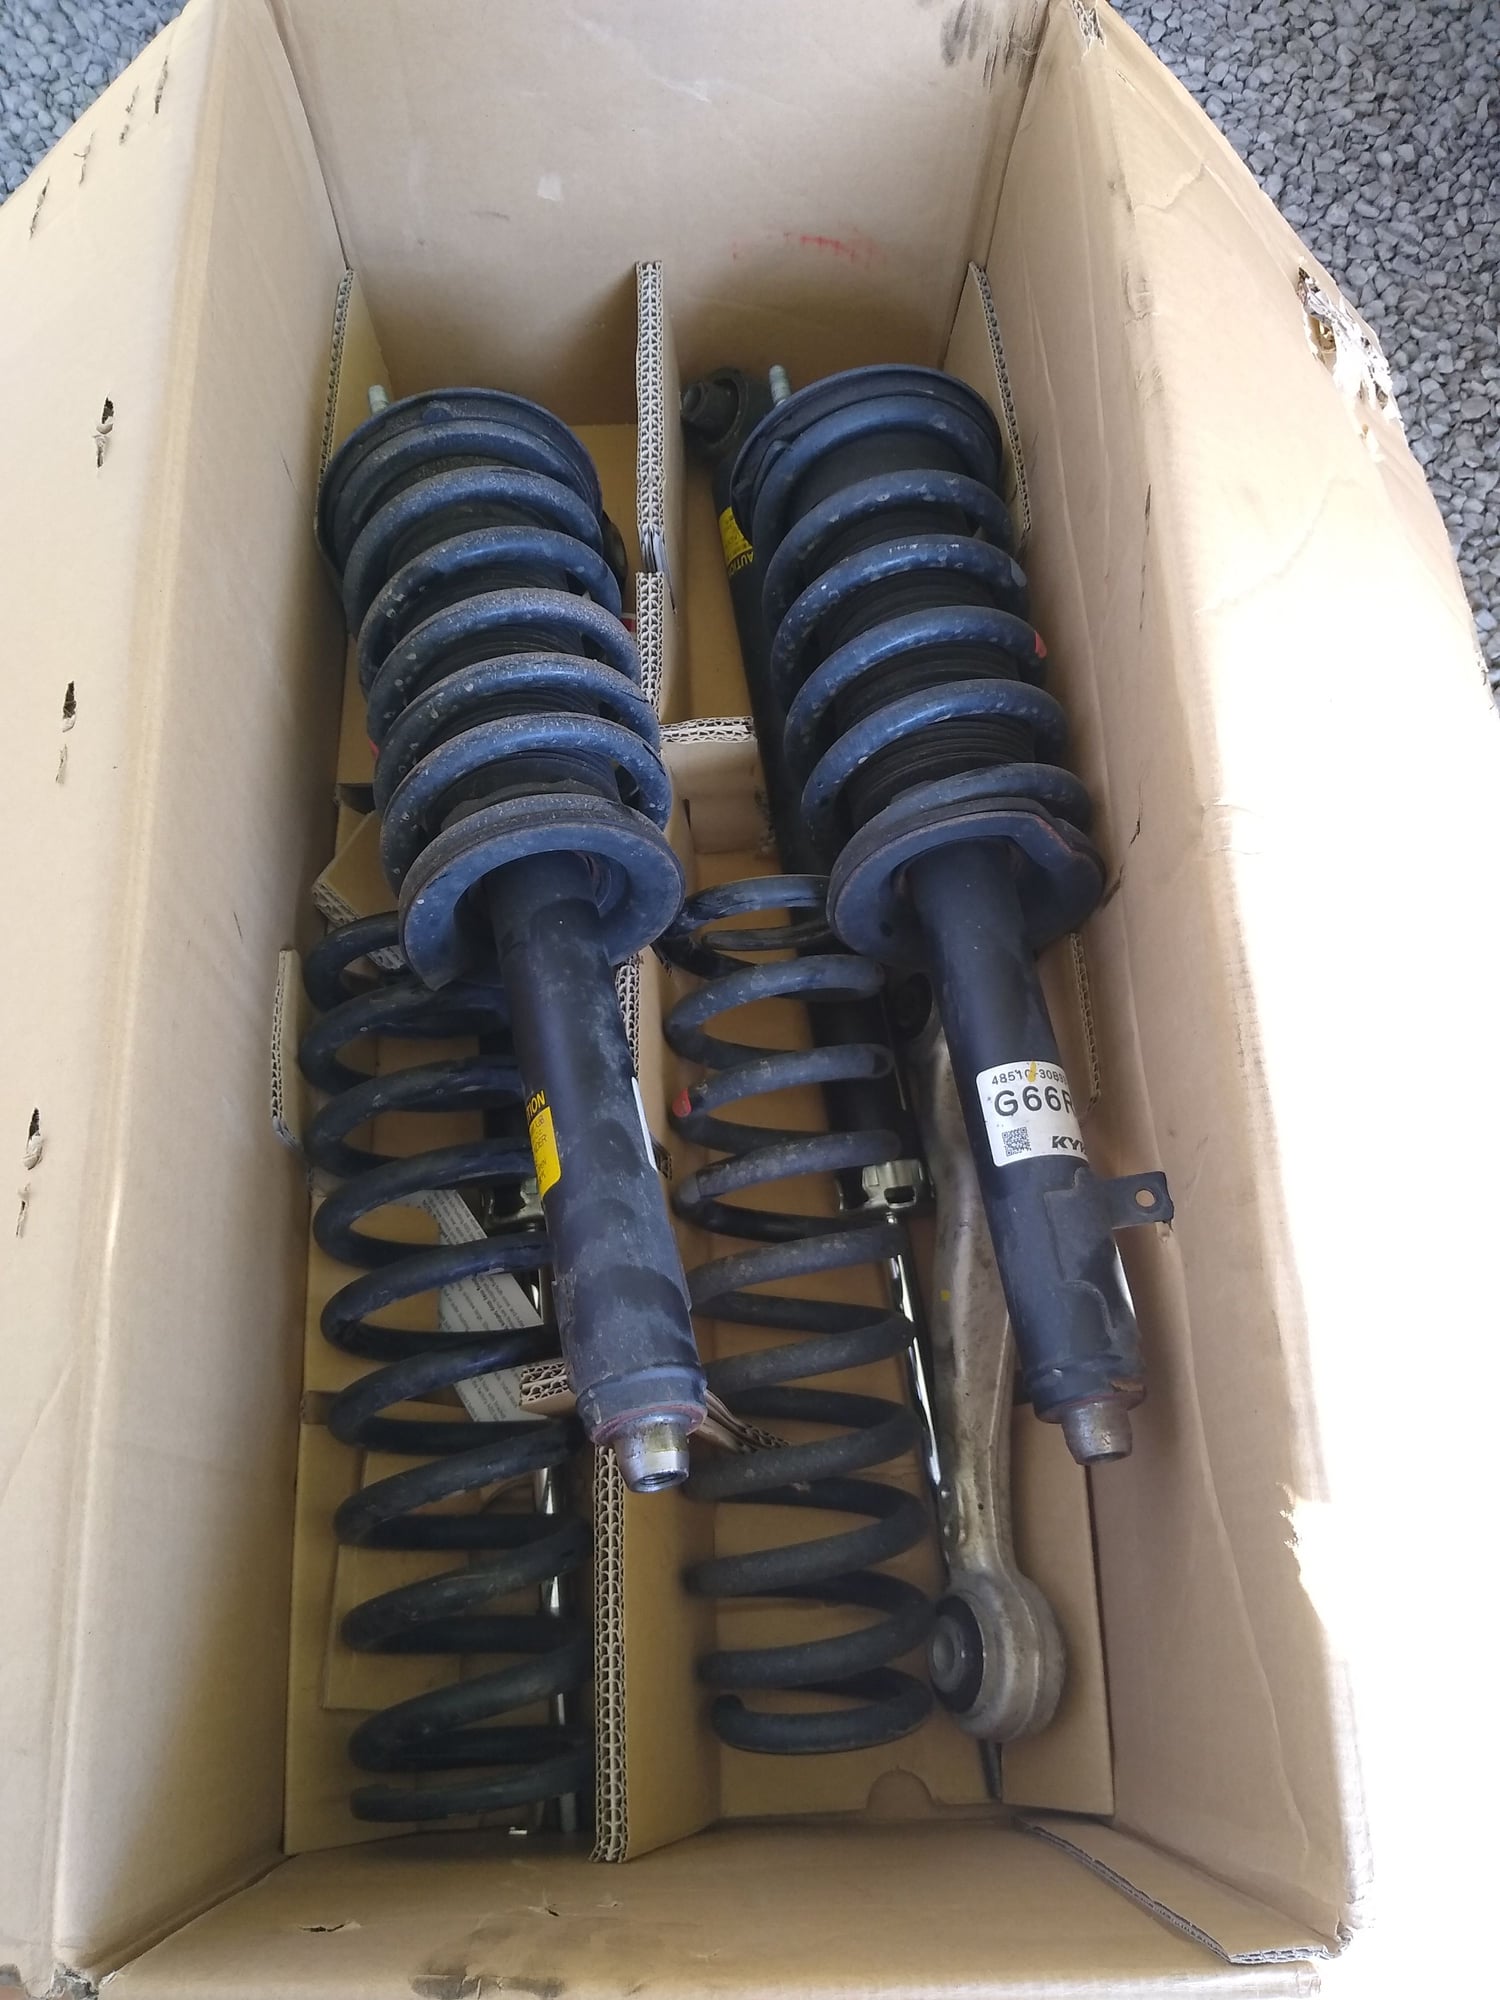 Steering/Suspension - Factory shocks and springs from 2015 GS350 F-Sport AWD - Used - 2015 Lexus GS350 - Catlett20119, VA 20119, United States